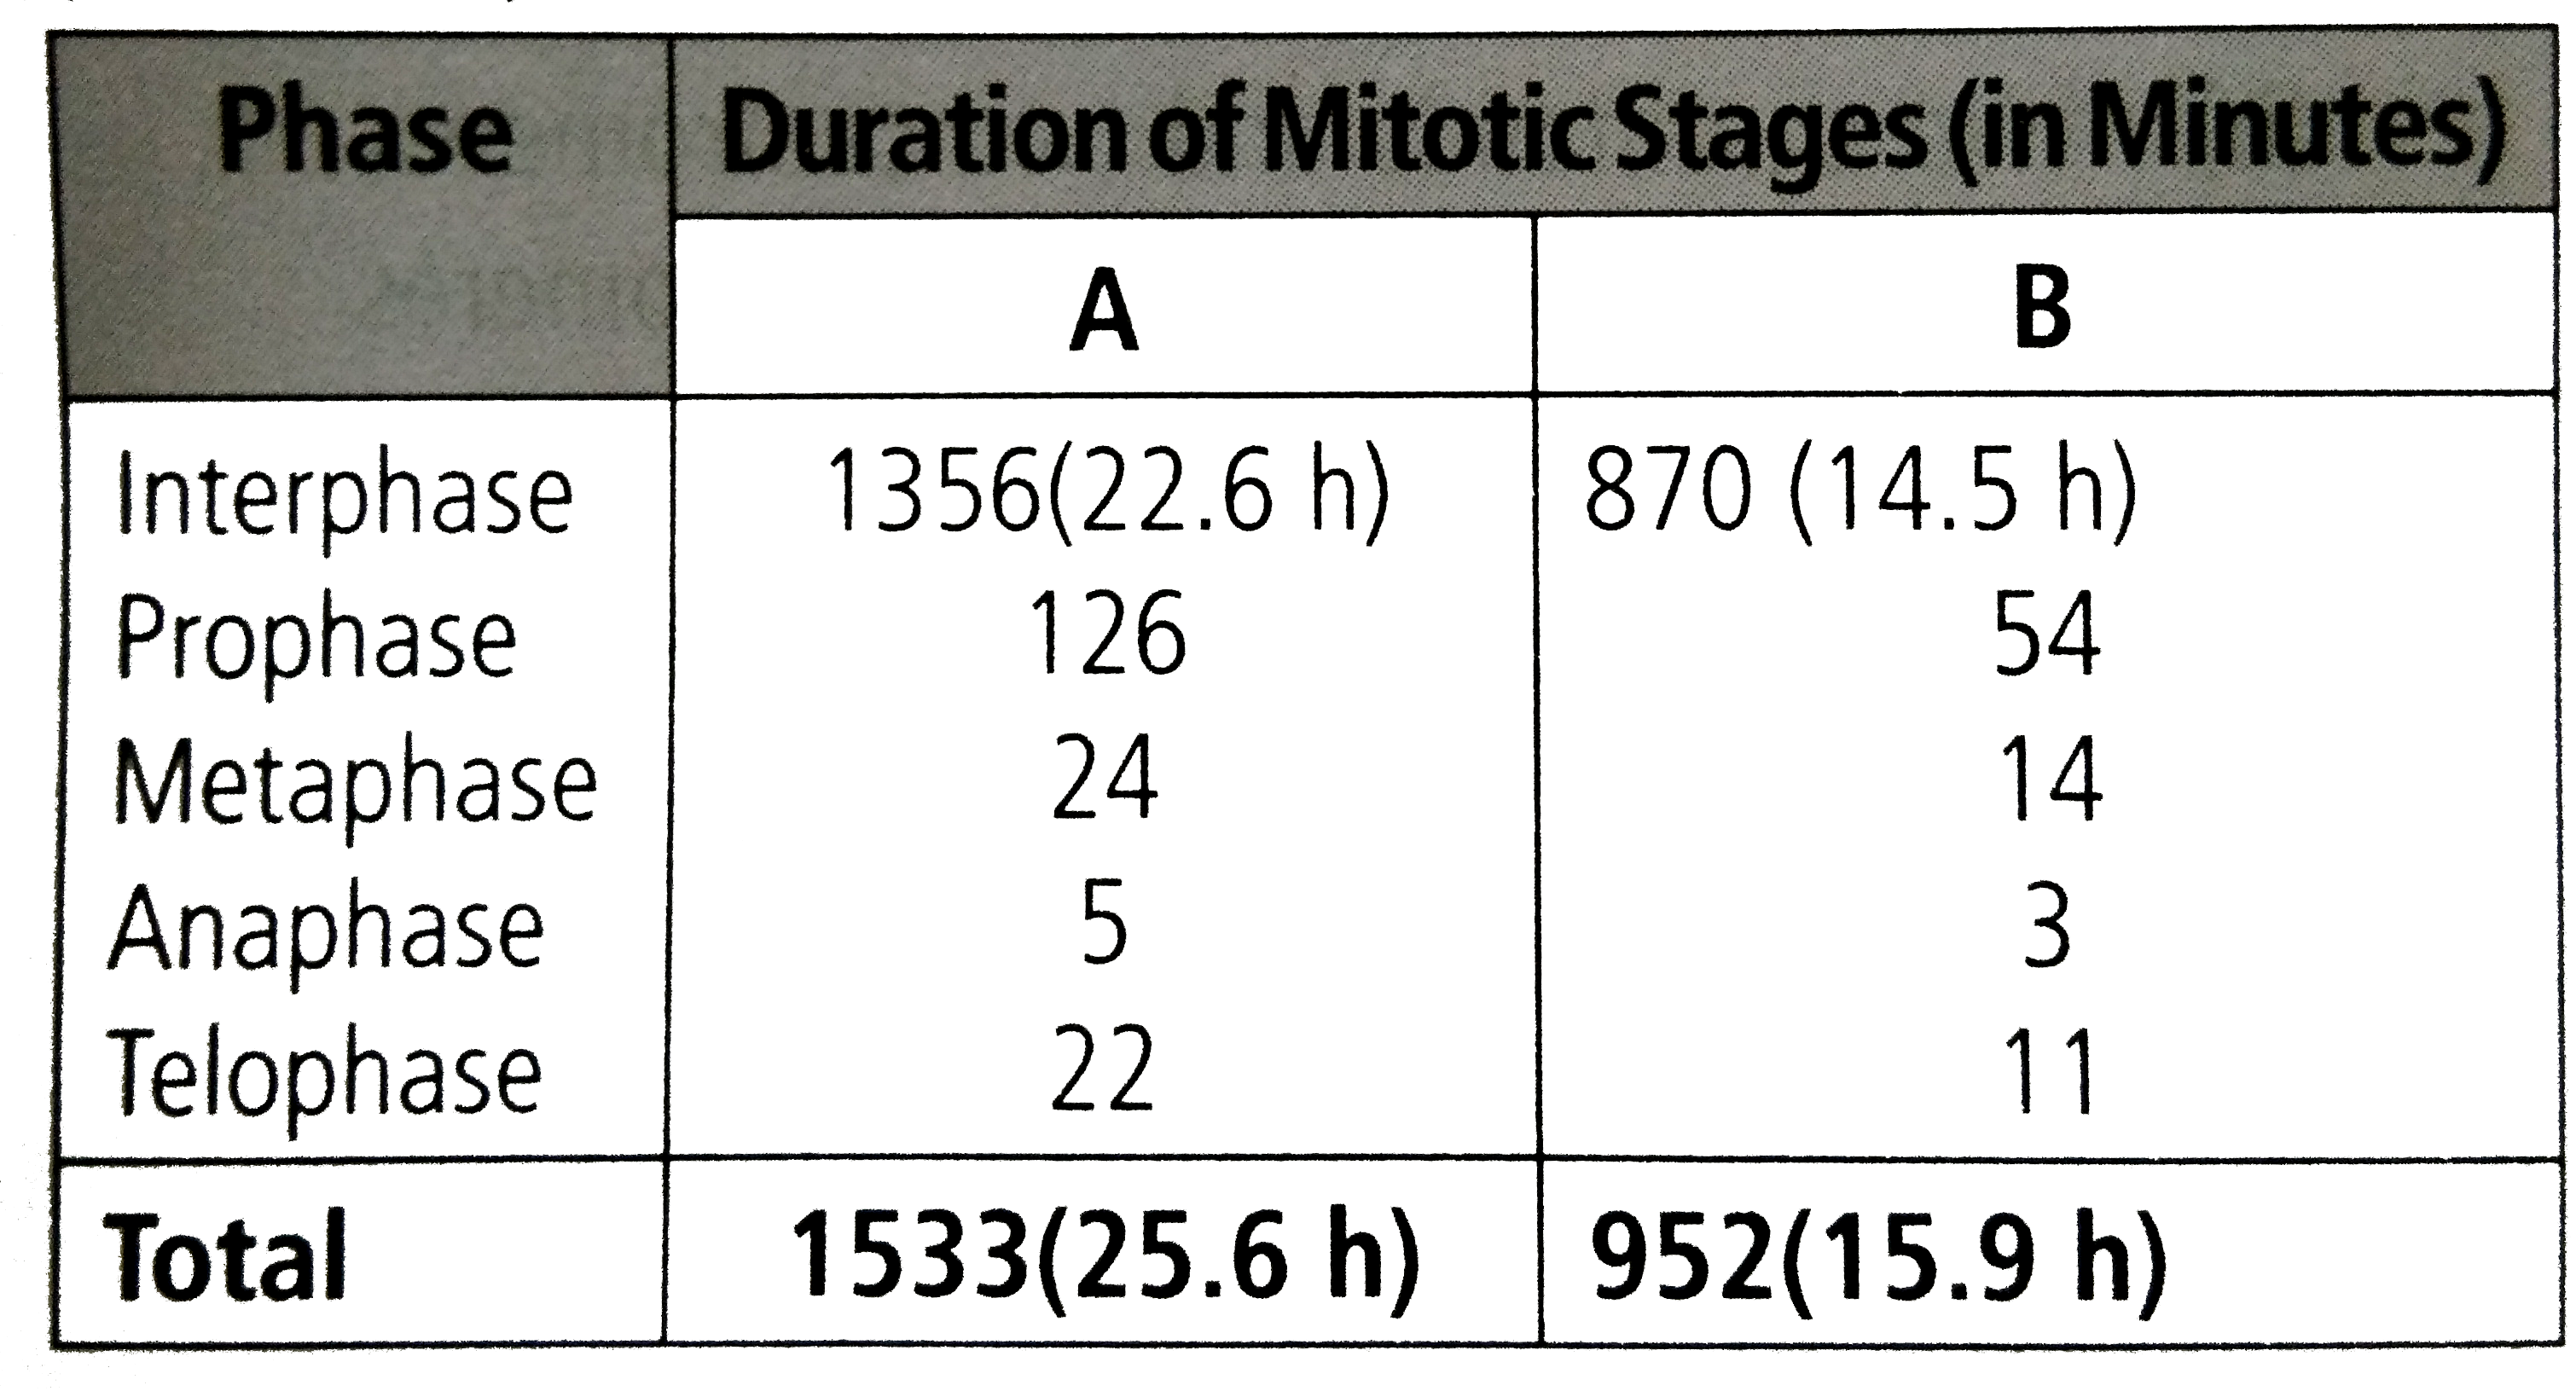 The durations of mitotic stages in two situations. (A and B) are tabulated below.      Following are some interpretations:    1. 'A' and 'B' indicate the same plant tissue grown at higher and lower temperature respectively.   II. 'A' indicates a slow growing plant species and 'B' indicates a fast growing plant species.    III. Both 'A' and 'B' indicate dormant  plant tissues with excessively long interphase.    The correct interpretations is/are